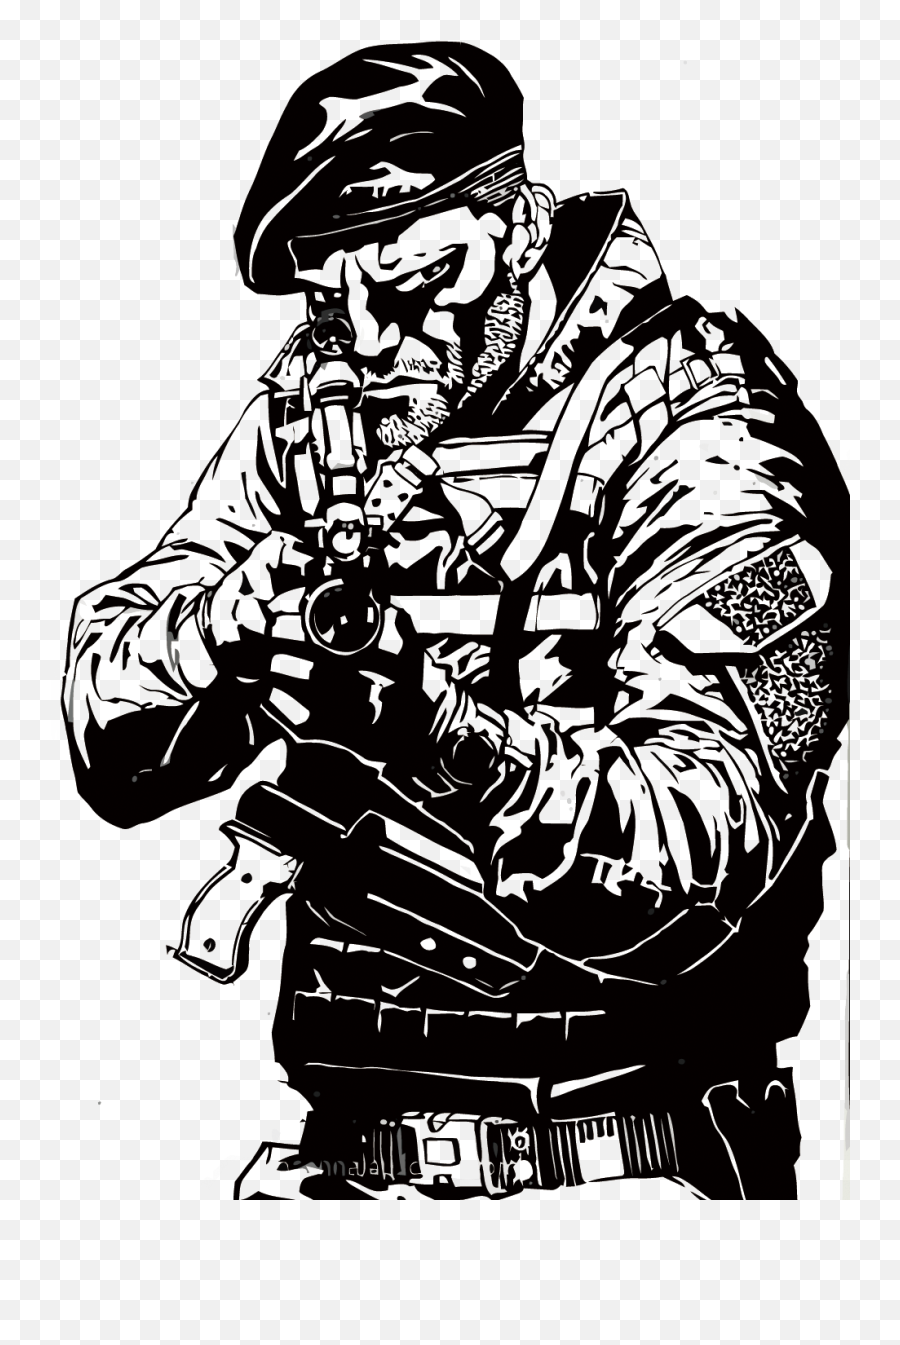 Download Soldier Png High - Quality Image Soldier Vector Png Soldier Vector,Soldier Png